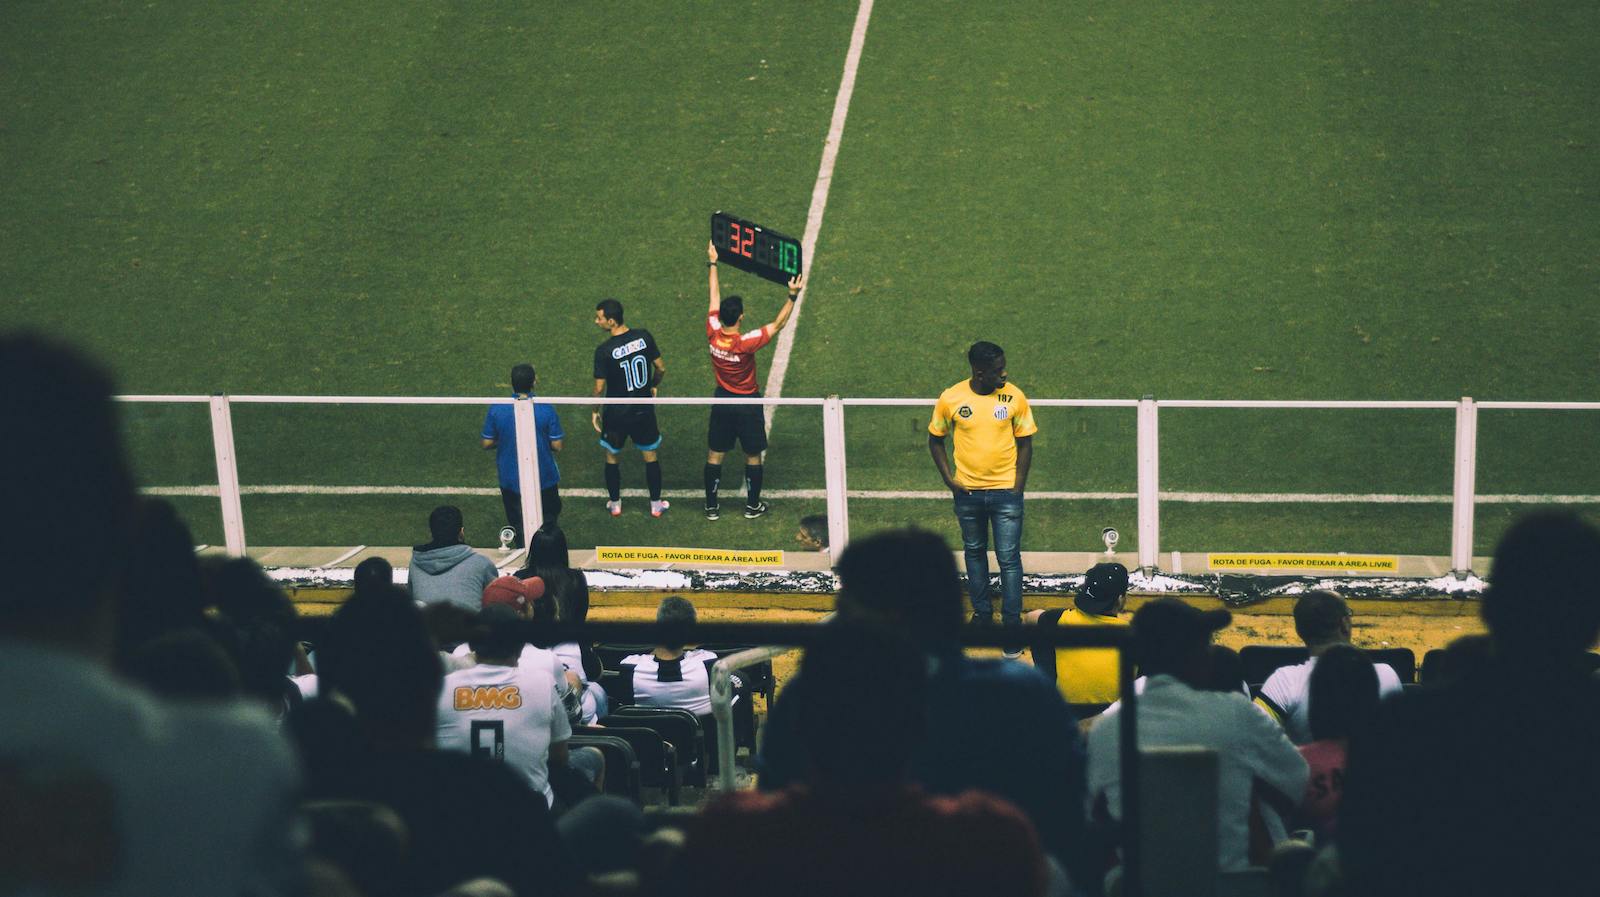 Player about to sub into a professional soccer game